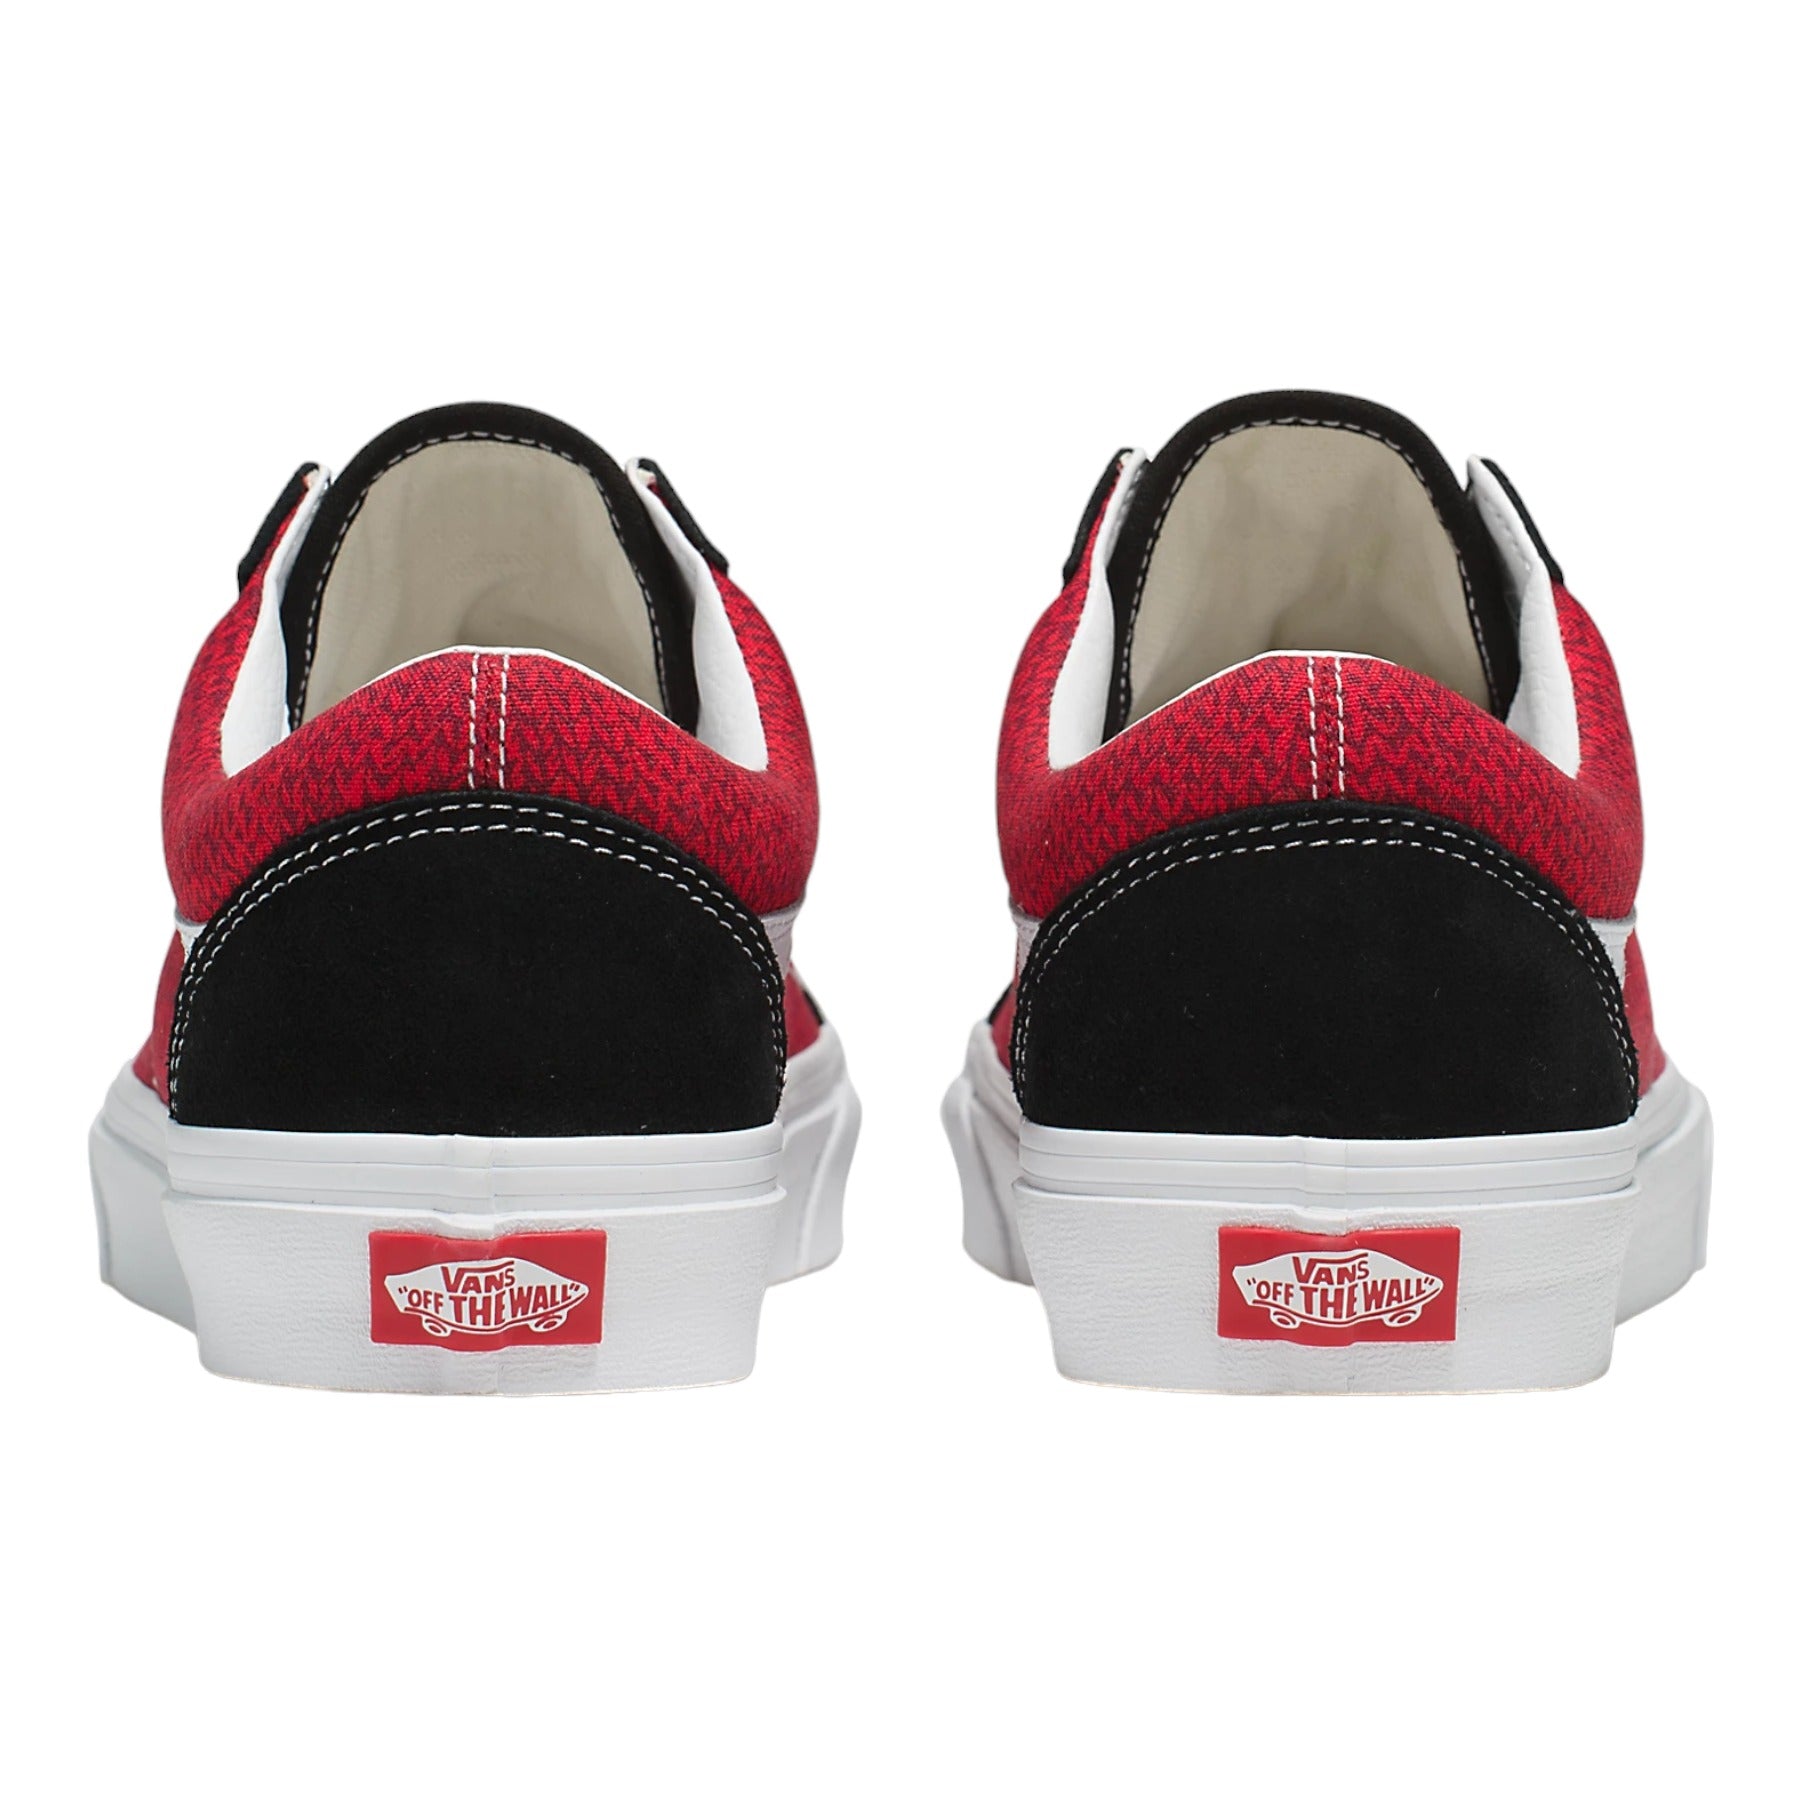 Vans Old Skool Shoes - Sweater Weather Red/White